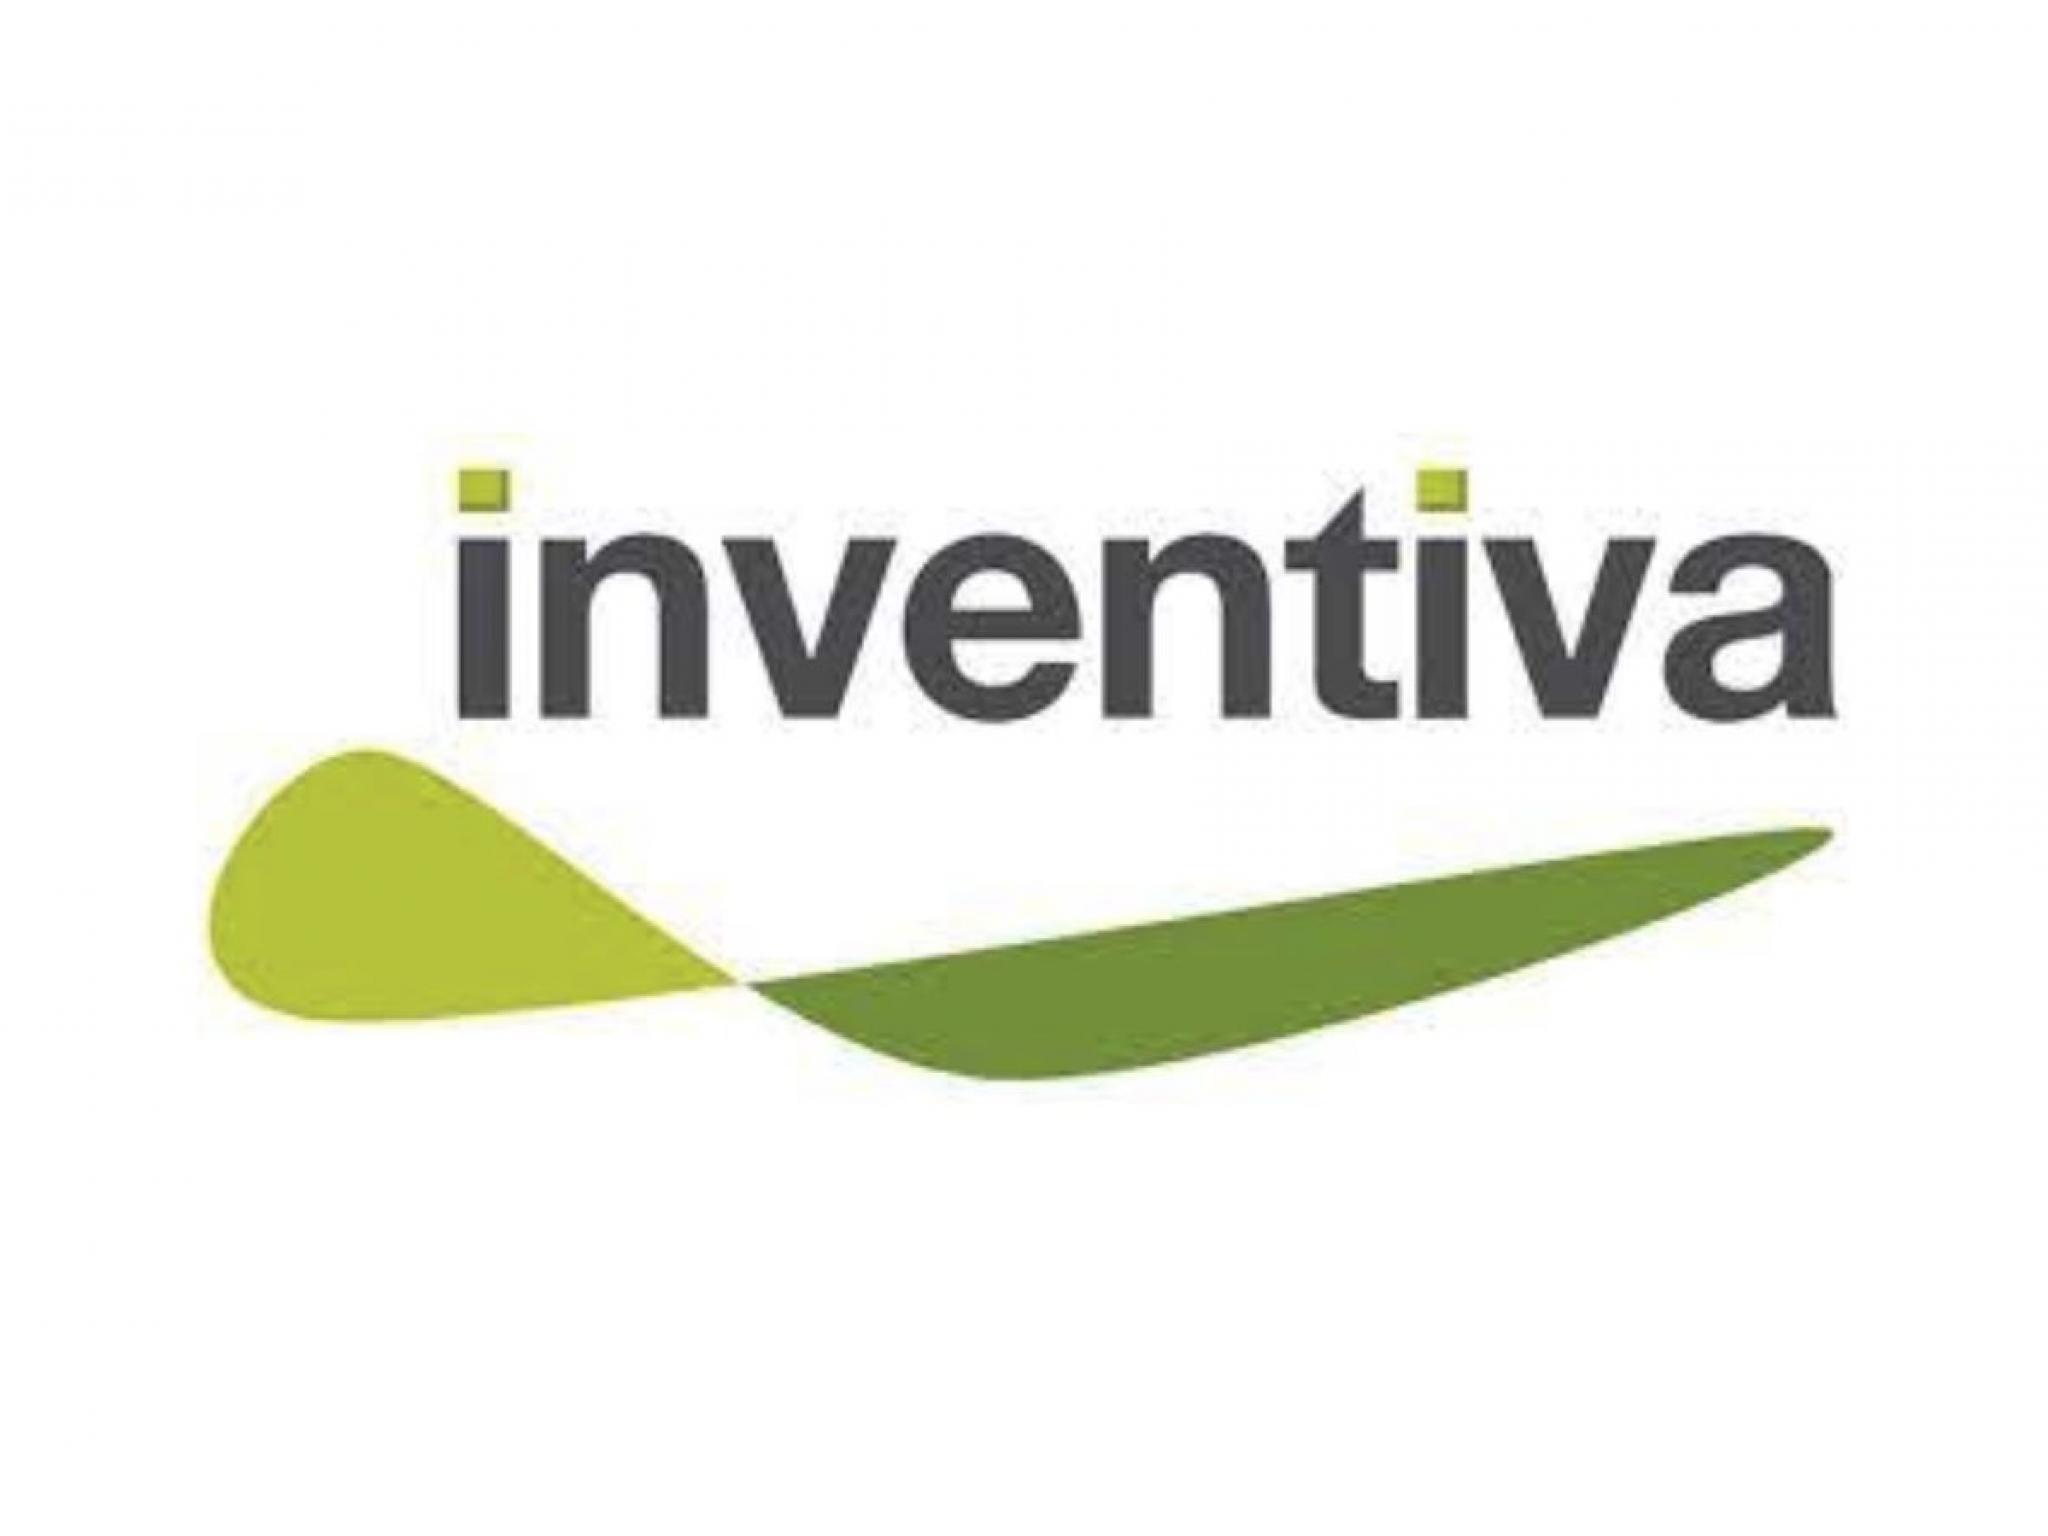  why-inventiva-shares-are-trading-higher-by-24-here-are-20-stocks-moving-premarket 